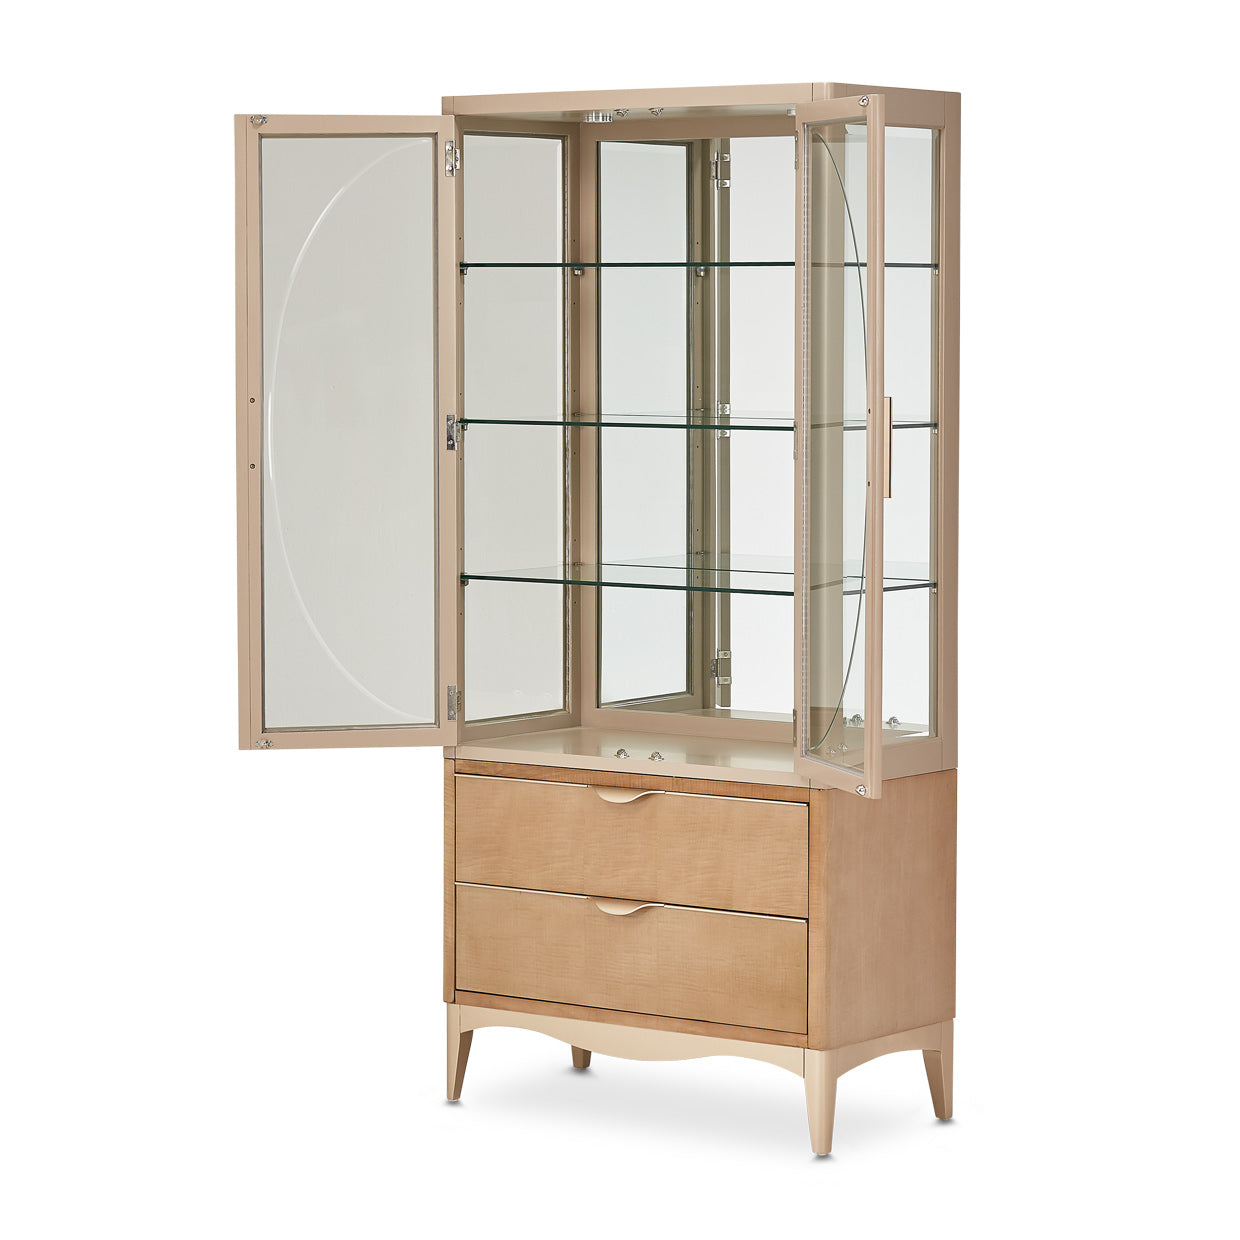 Display Cabinet (2 Pc), Malibu Crest Display Cabinet, Sophisticated display solution, Glass shelving, Mirrored back panel, LED display lighting, China display, Accents showcase, Hardwood solids construction, Pre-Dyed Swirl Mahogany veneer, Blush finish, Chardonnay accents, Velvet lined drawers, Self-closing glides, Curved waterfall pulls, Chardonnay finish details, Home decor highlight, Illuminated display, Elegant storage, solution, Stylish display piece, dream art , Michael amini